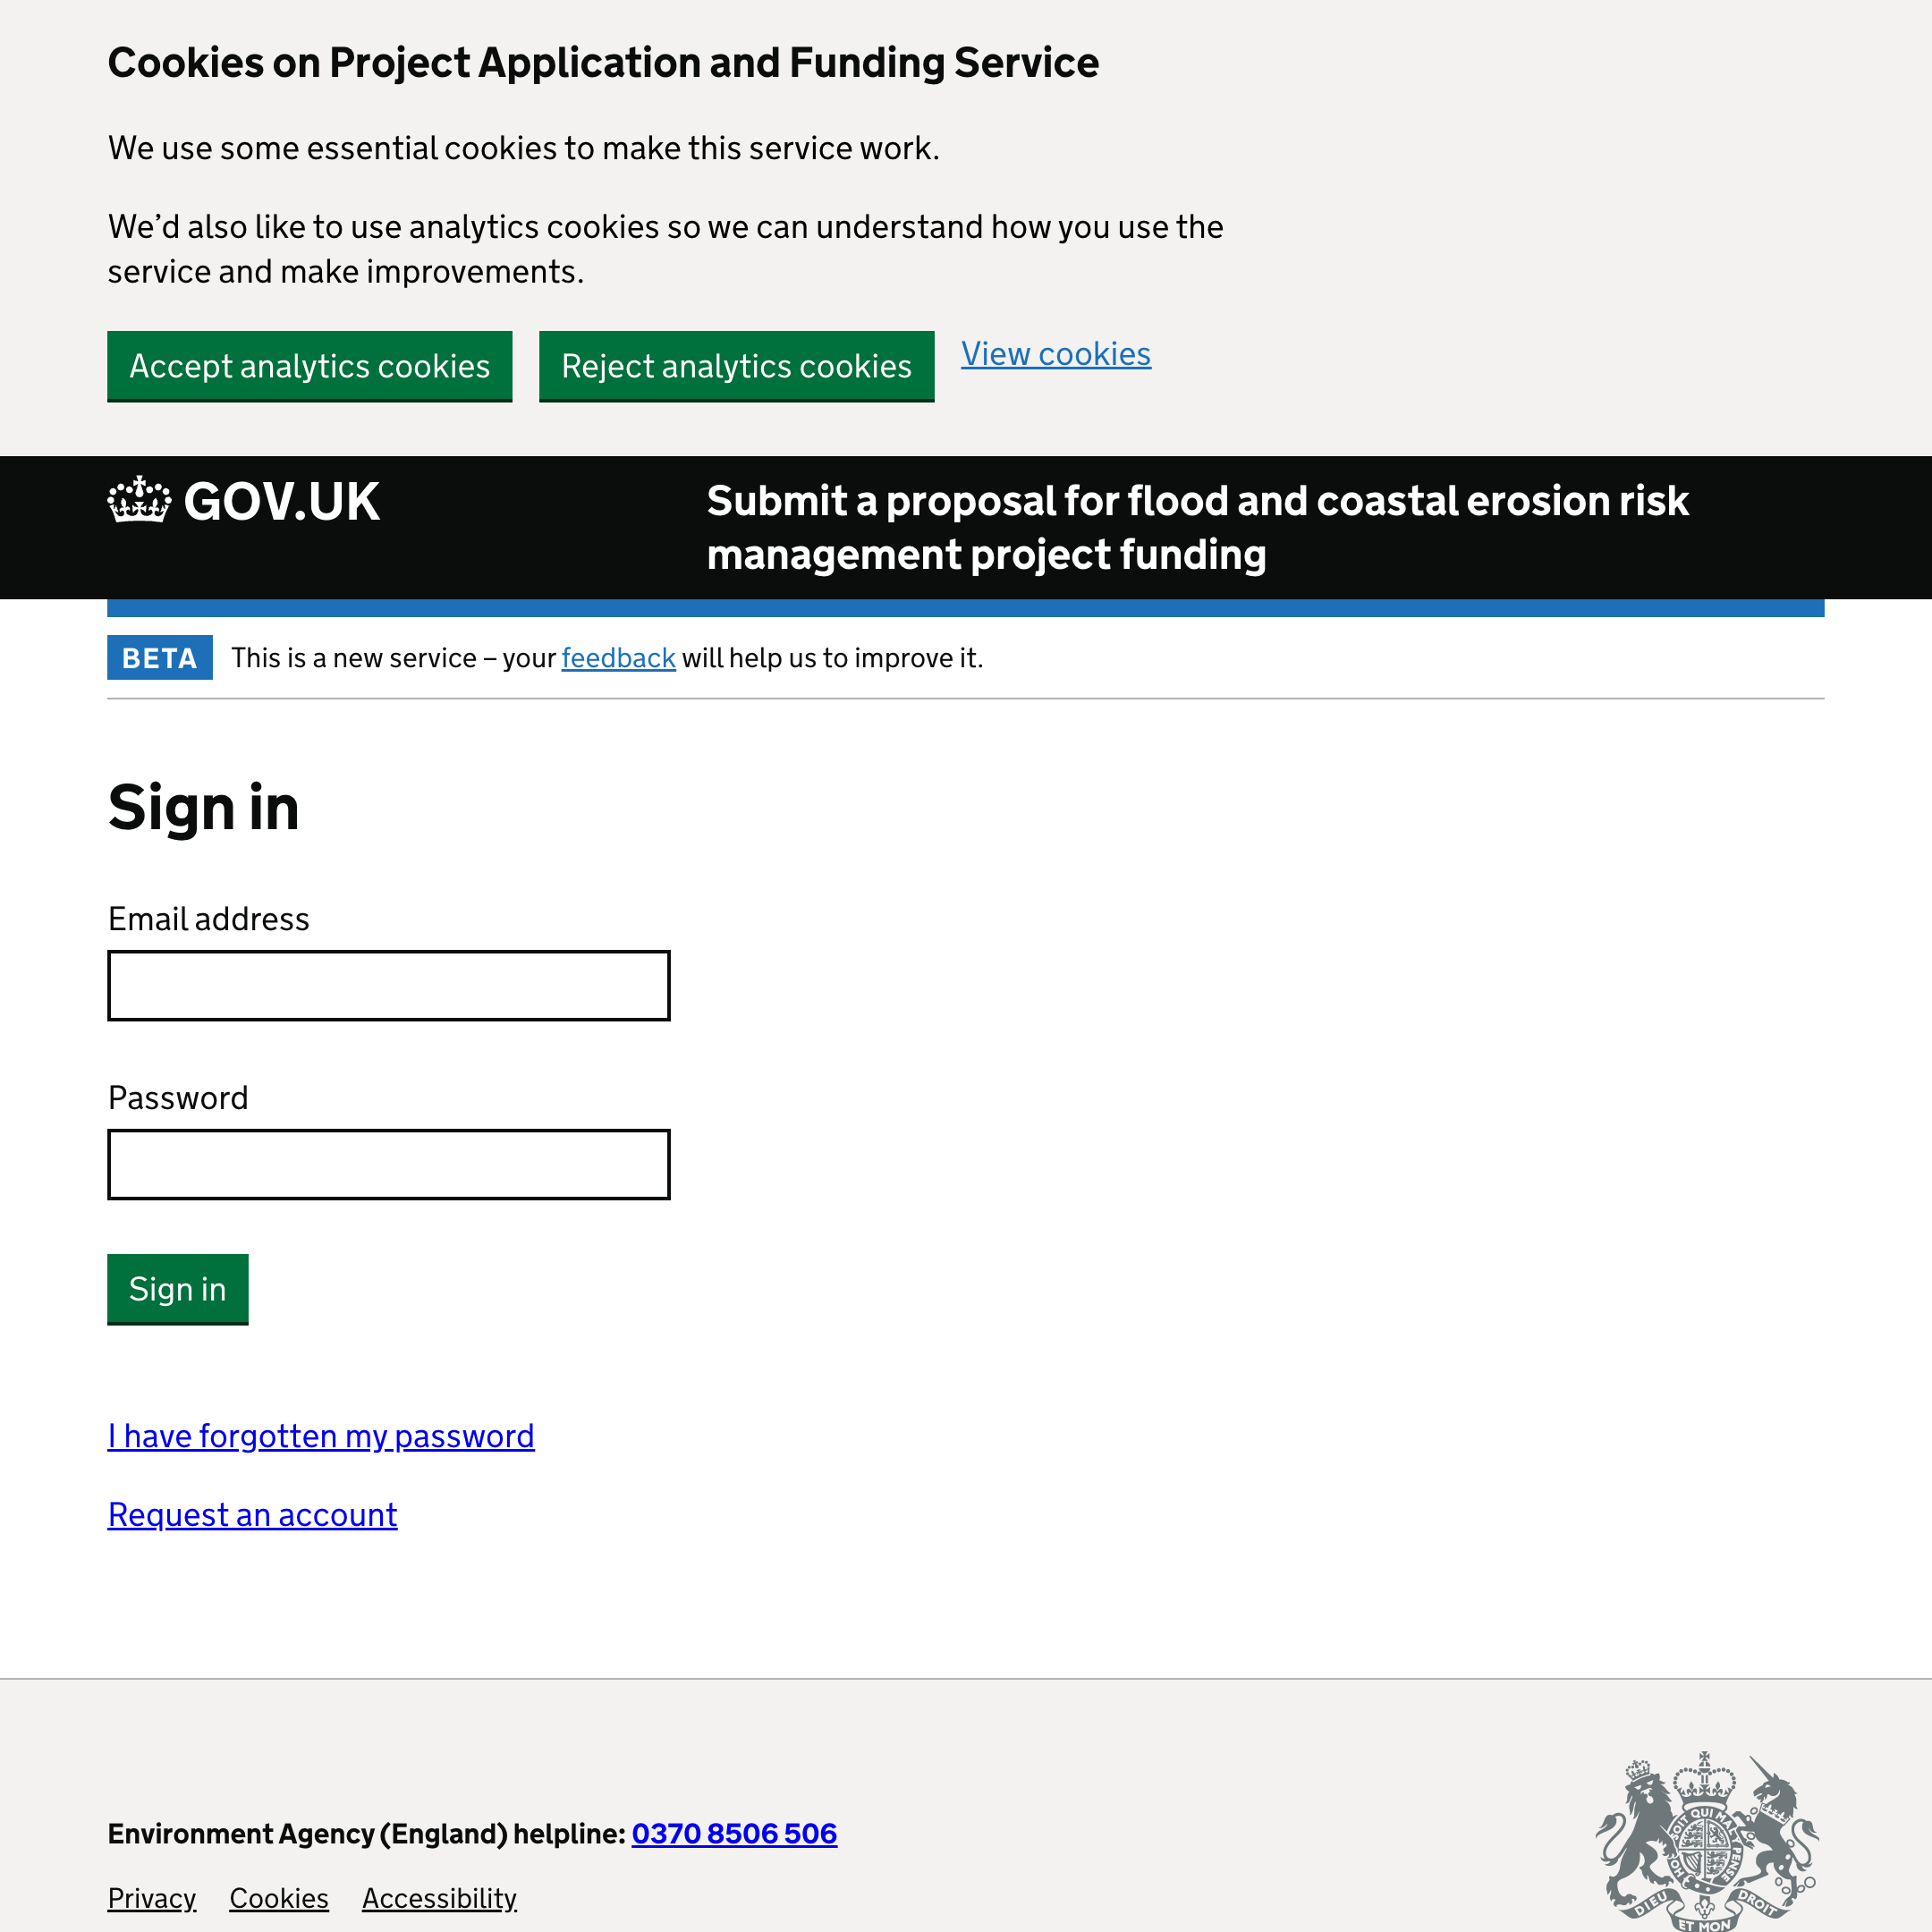 Submit a proposal for flood and coastal erosion risk management project funding